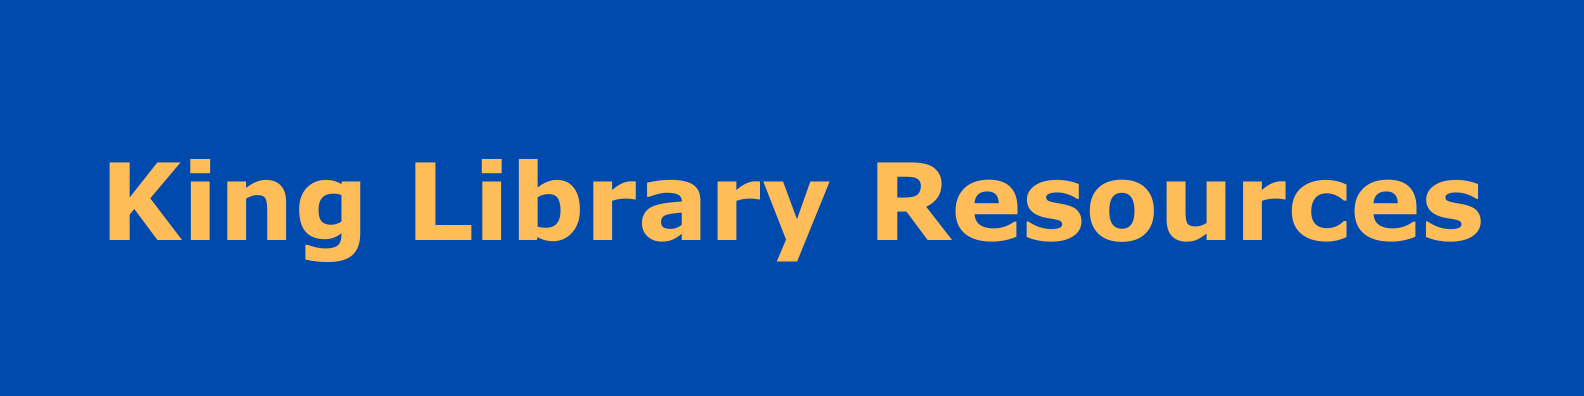 king library resources banner copy.png